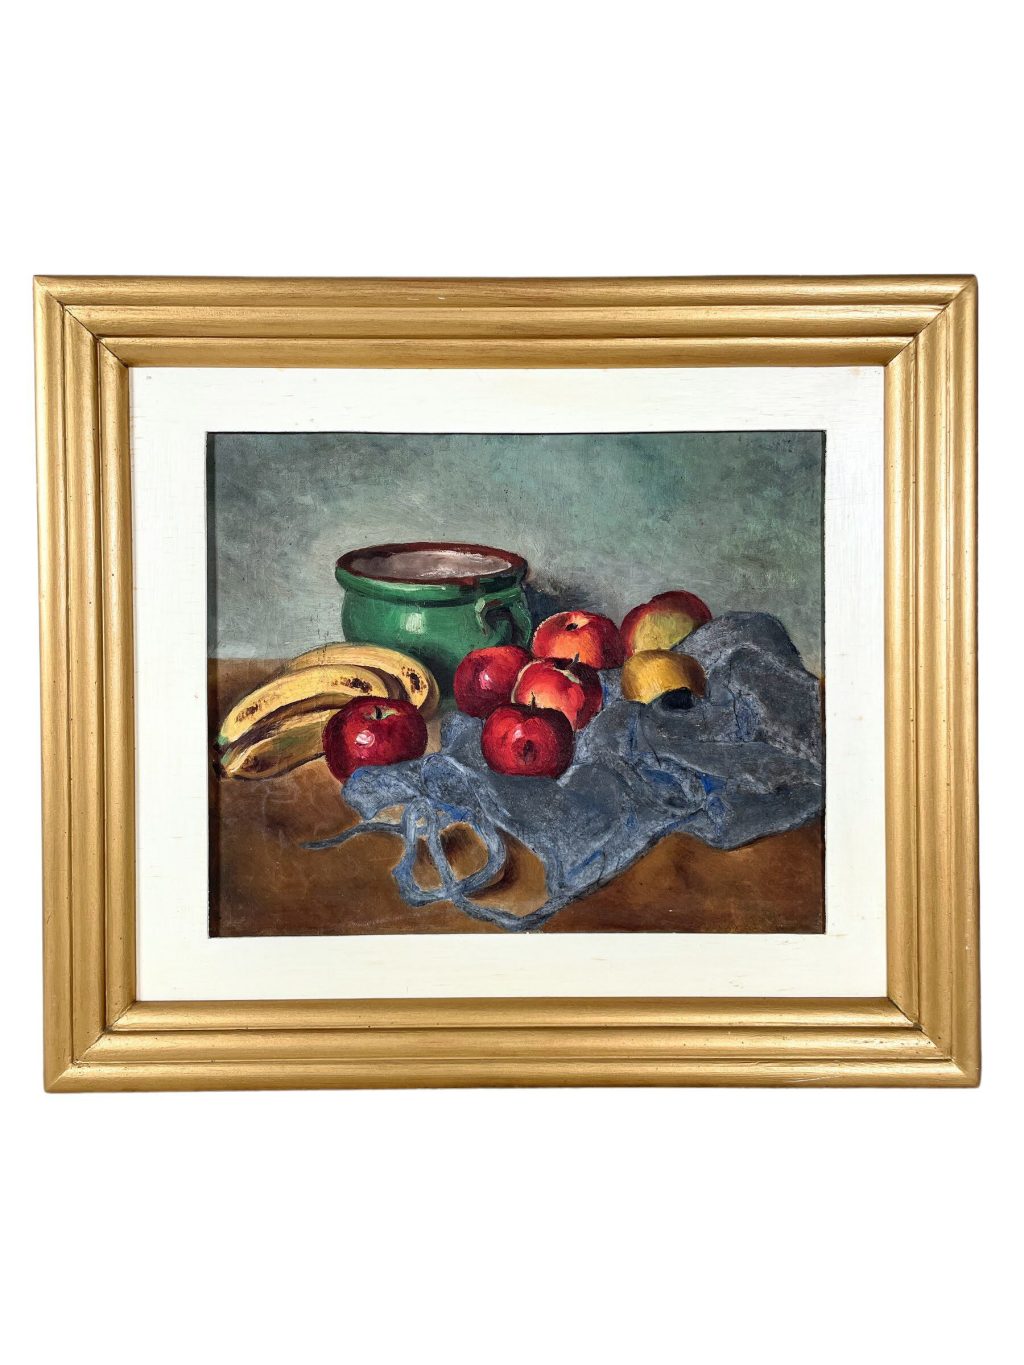 Vintage French Still Life Apples Bananas Apron Stoneware Pot Oil Painting On Canvas Blue Green Red circa 1928